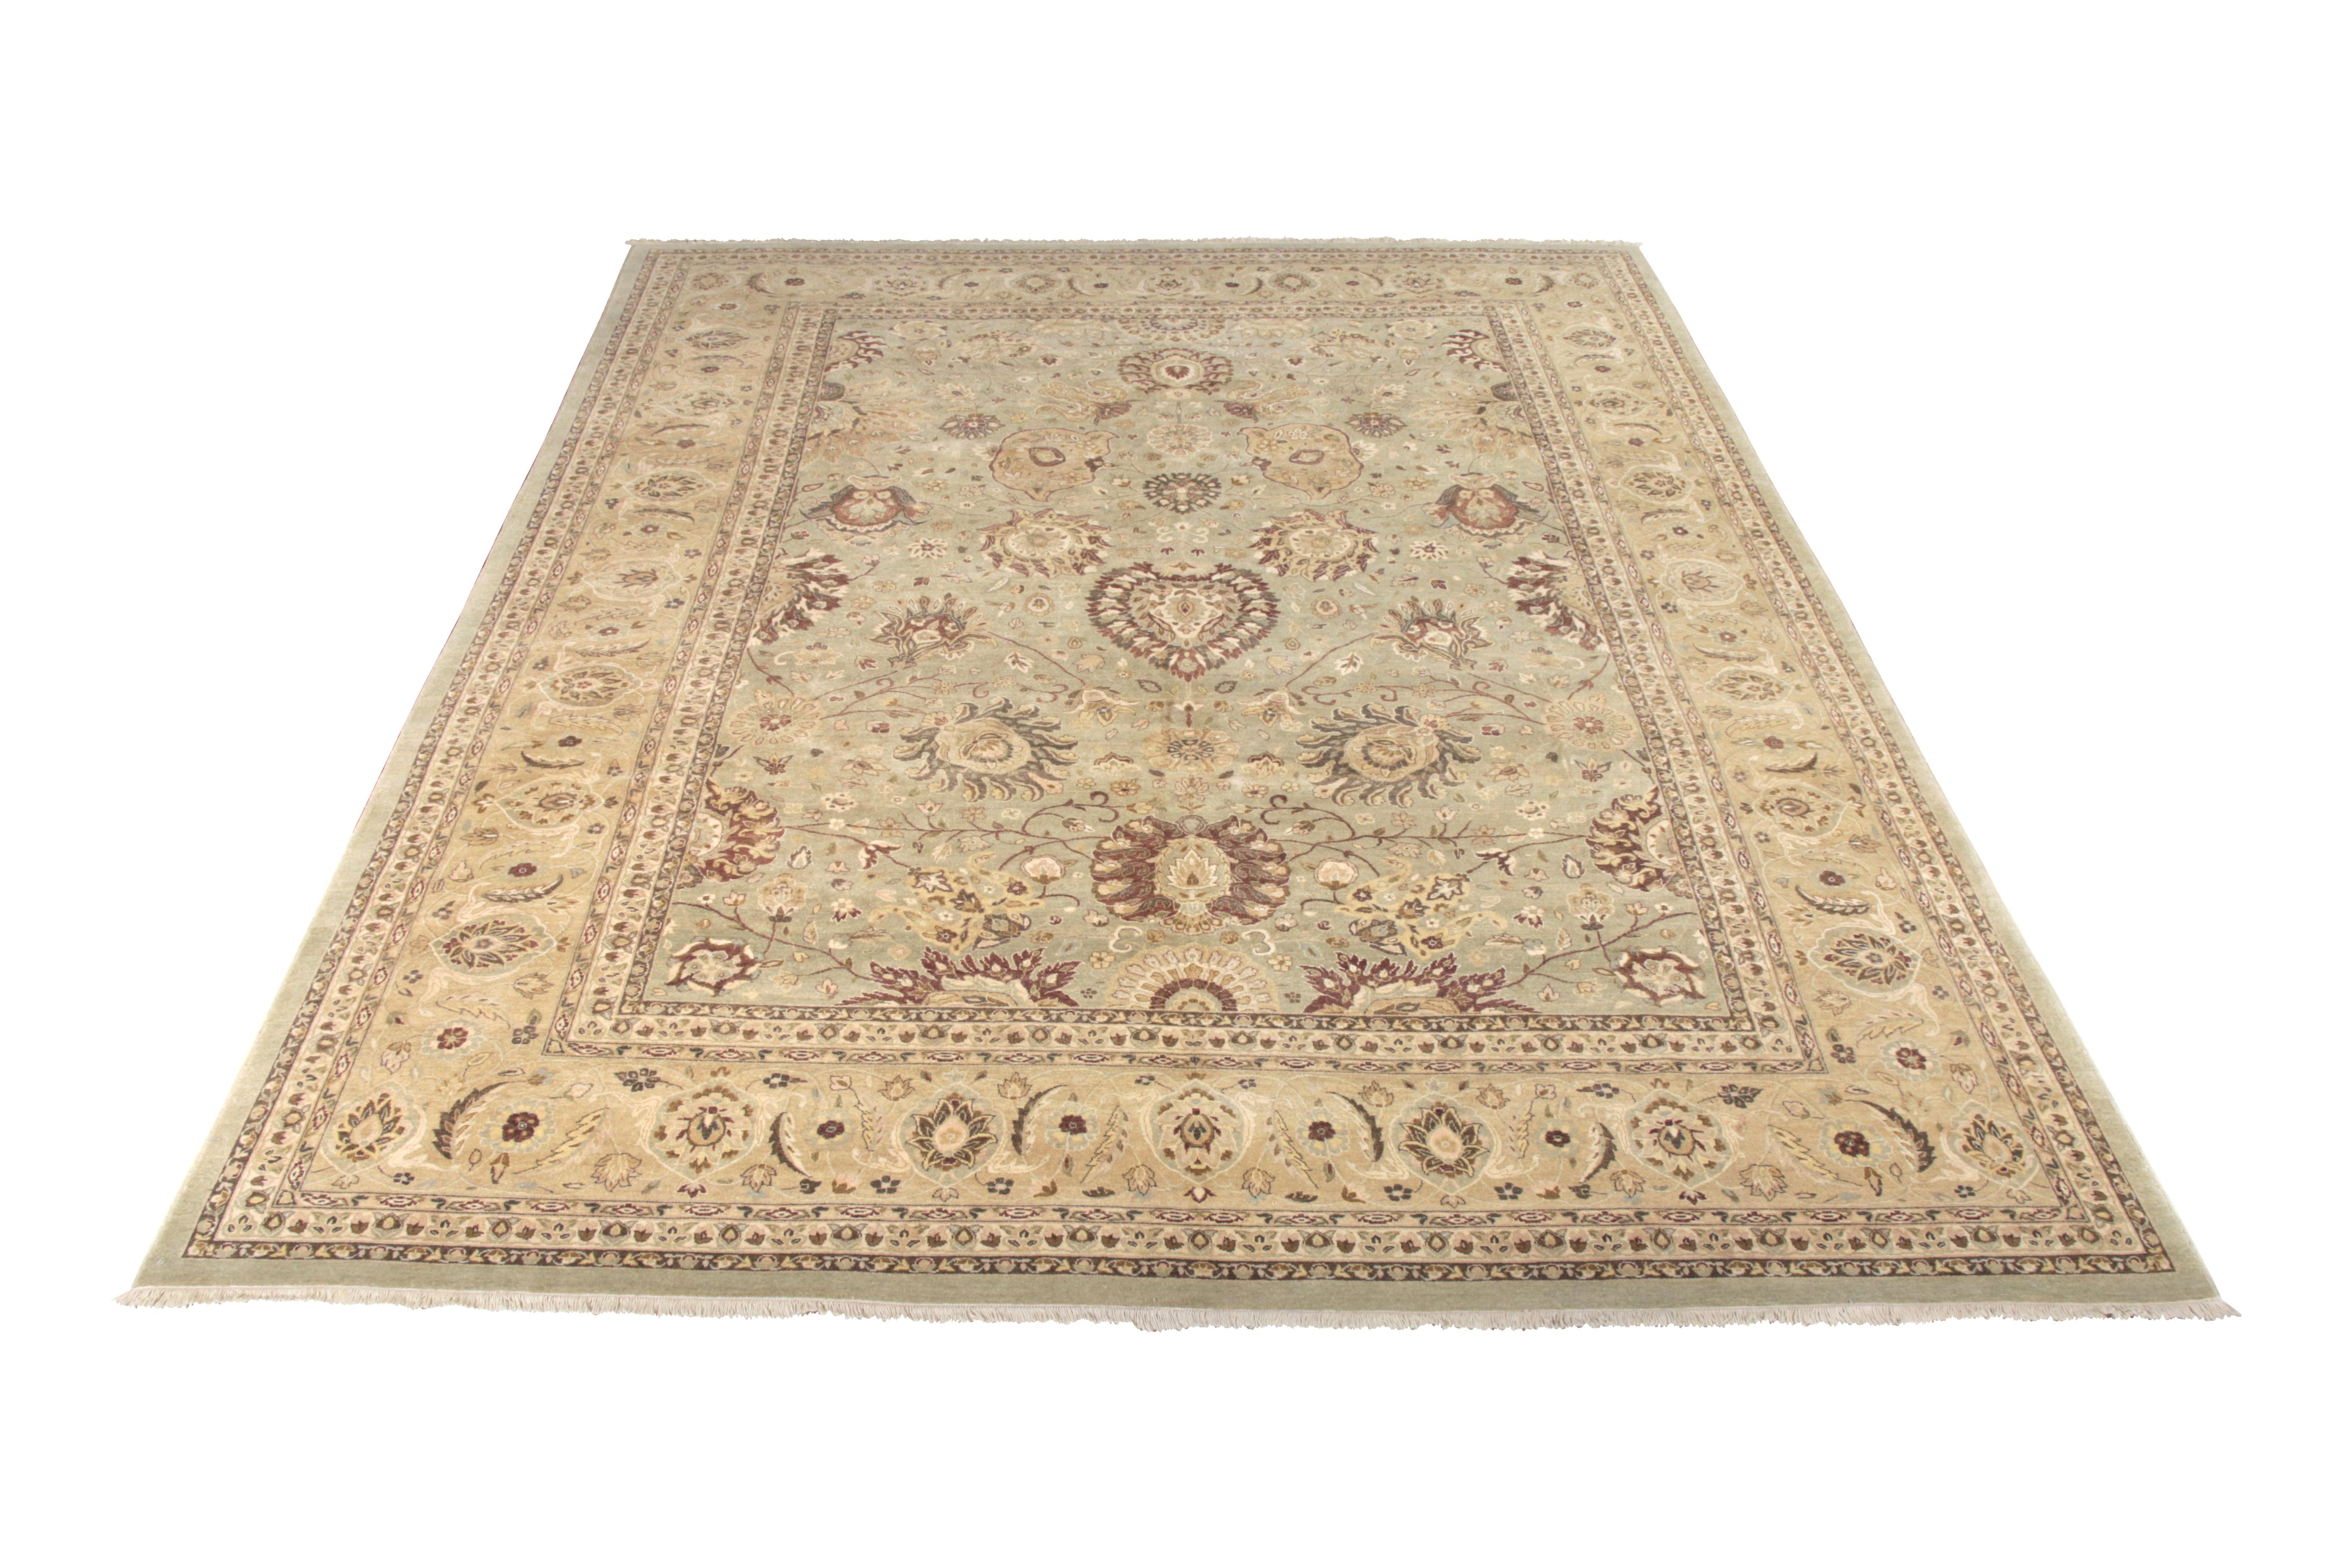 A 9 x 12 ode to celebrated Tabriz rug styles in beige-brown and green hues, joining Modern Classics by Rug & Kilim. Enjoying finely woven wool, soft colors, and exceptional scale lending to this fabulous, sophisticated look. Furthermore, connoting